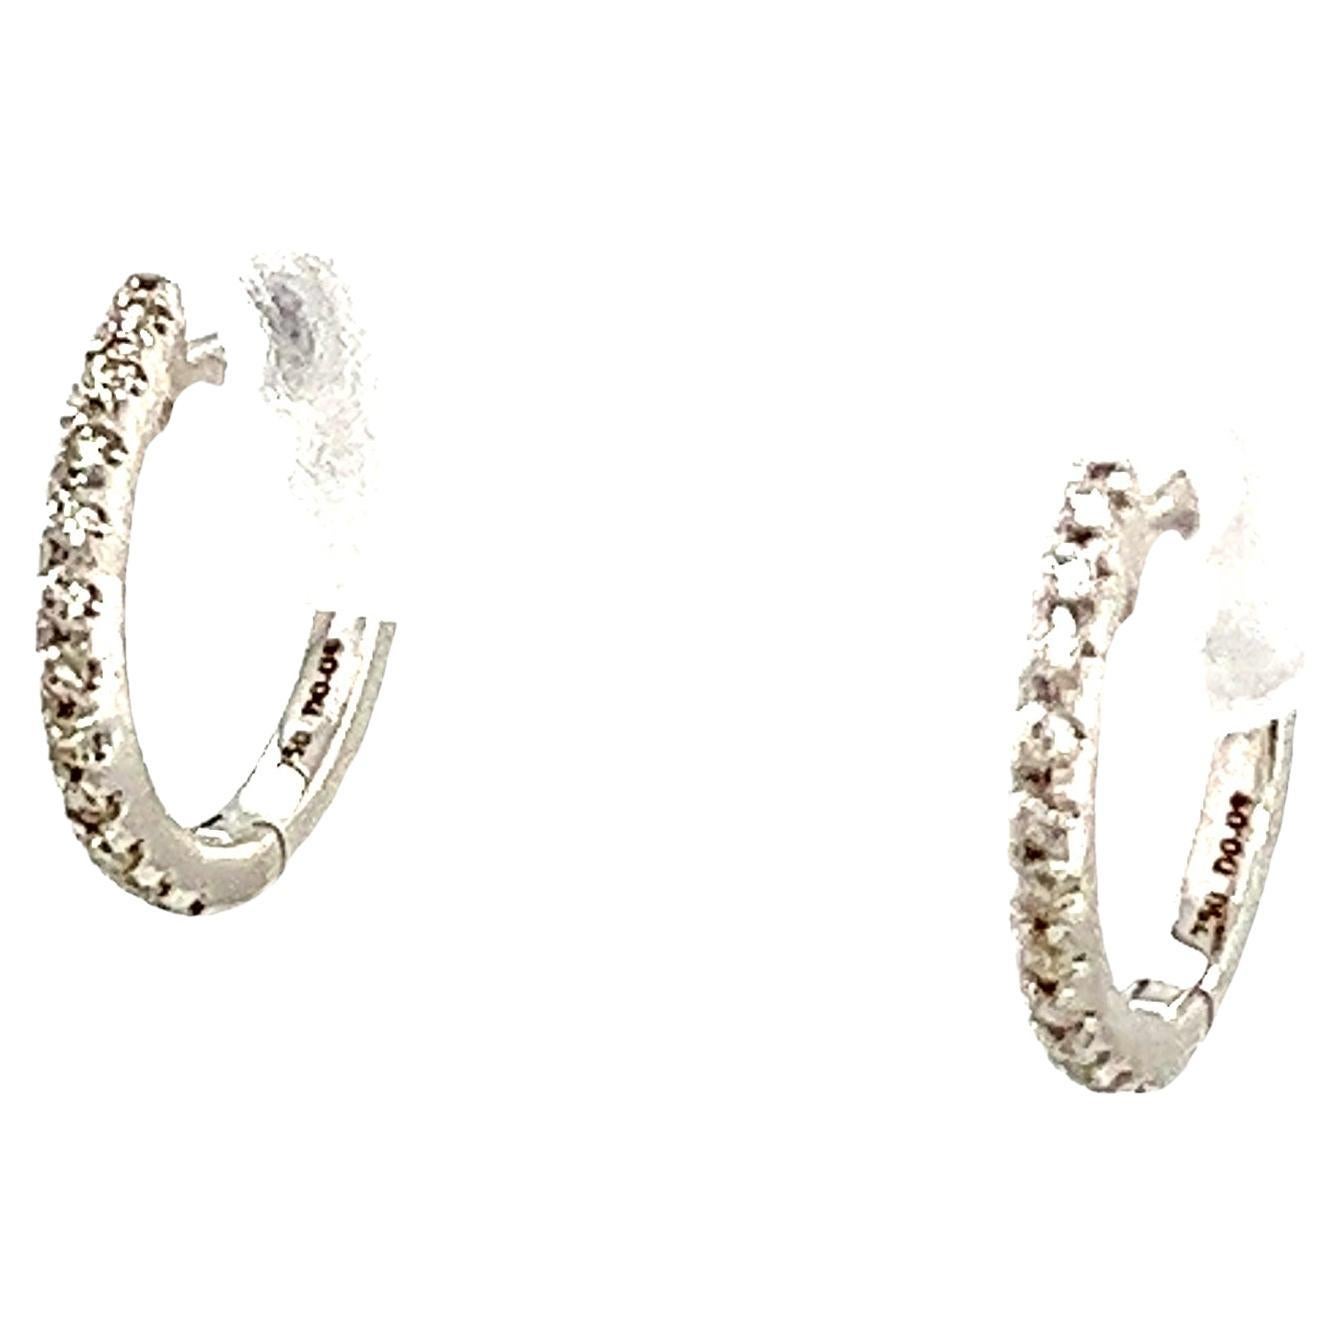 18ct White Gold Diamond Hoop Earrings, Set With 0.09ct Of Round Diamonds, 11mm For Sale